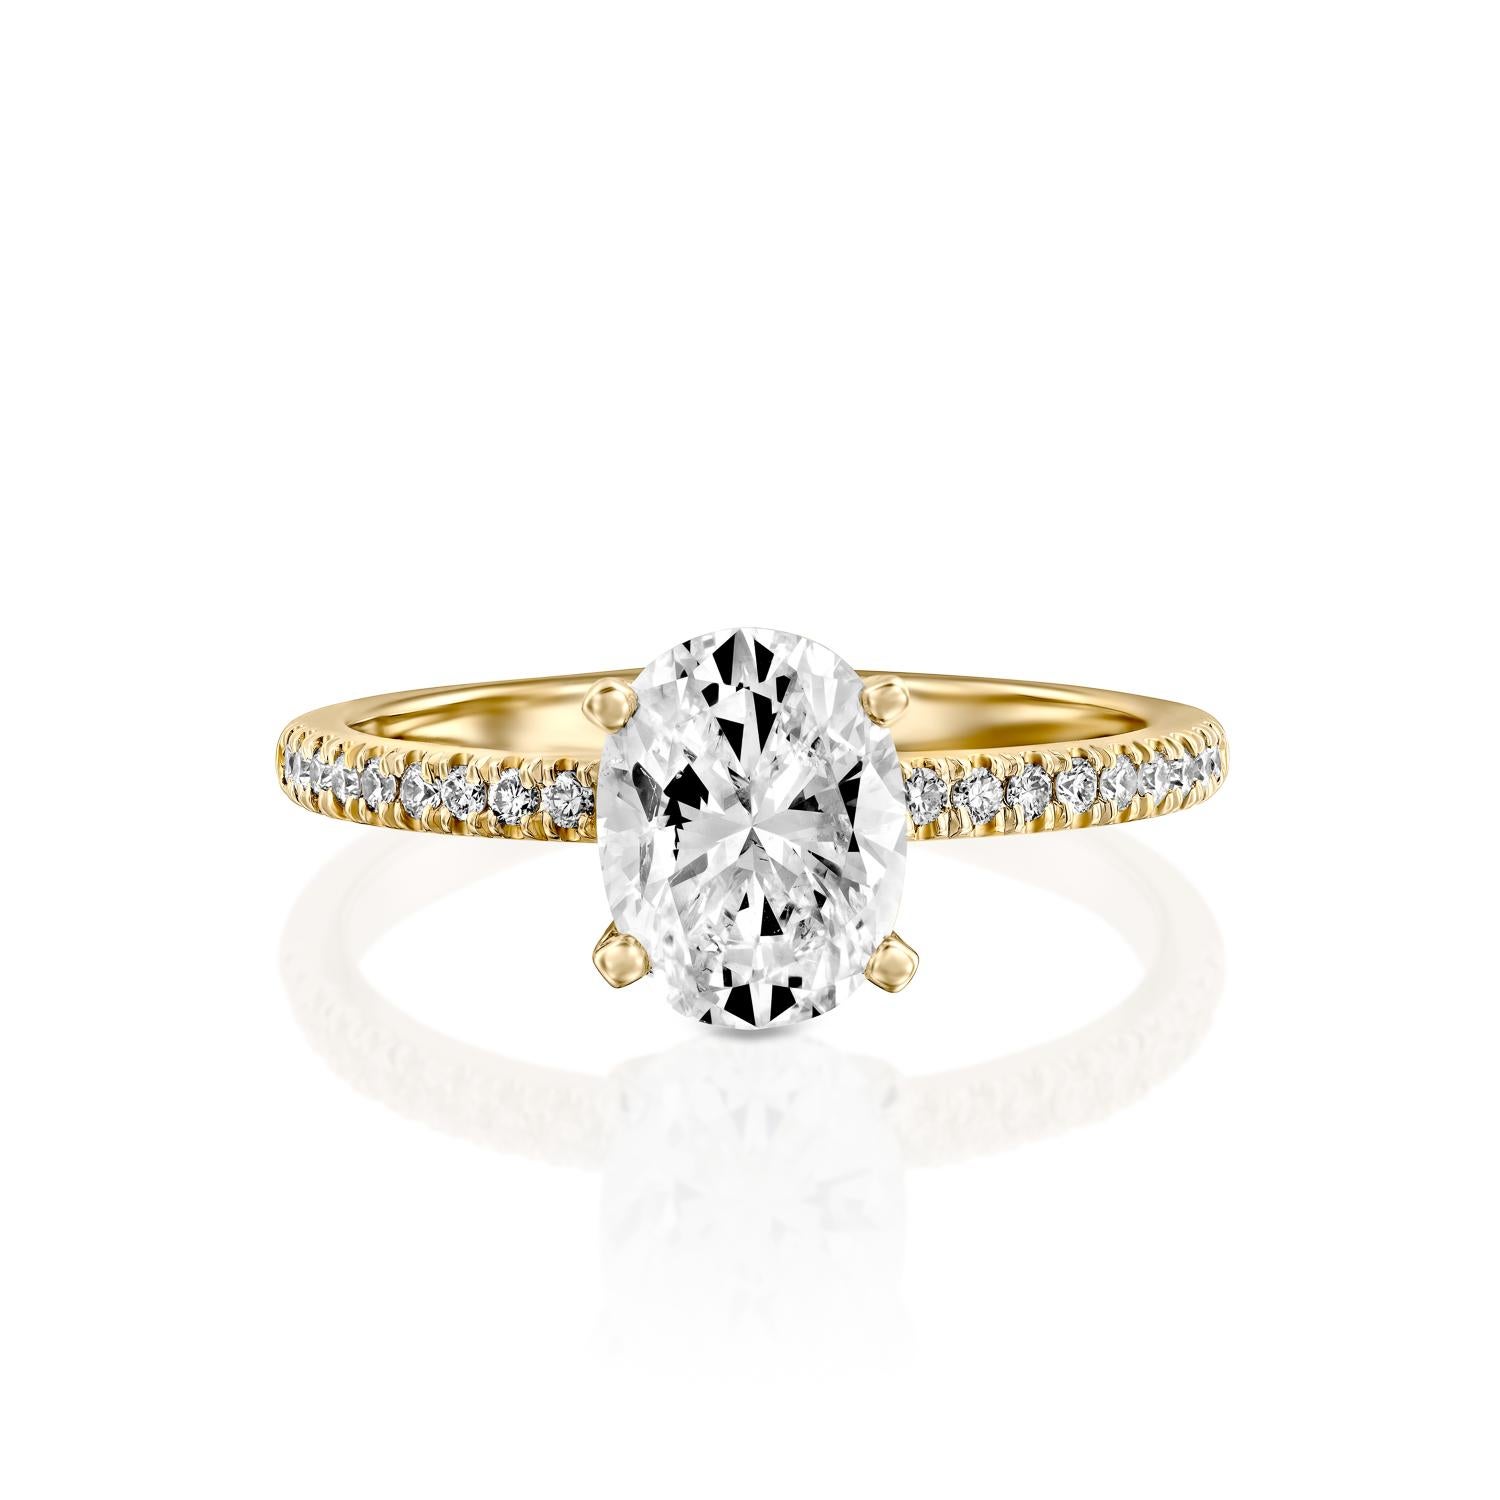 Exquisitely hand crafted ring features a solitaire GIA certified diamond. Ring features a 1 carat oval cut 100% eye clean natural diamond of F-G color and VS2-SI1 clarity and it is accented by diamonds of approx. 0.15 total carat weight. Set in a